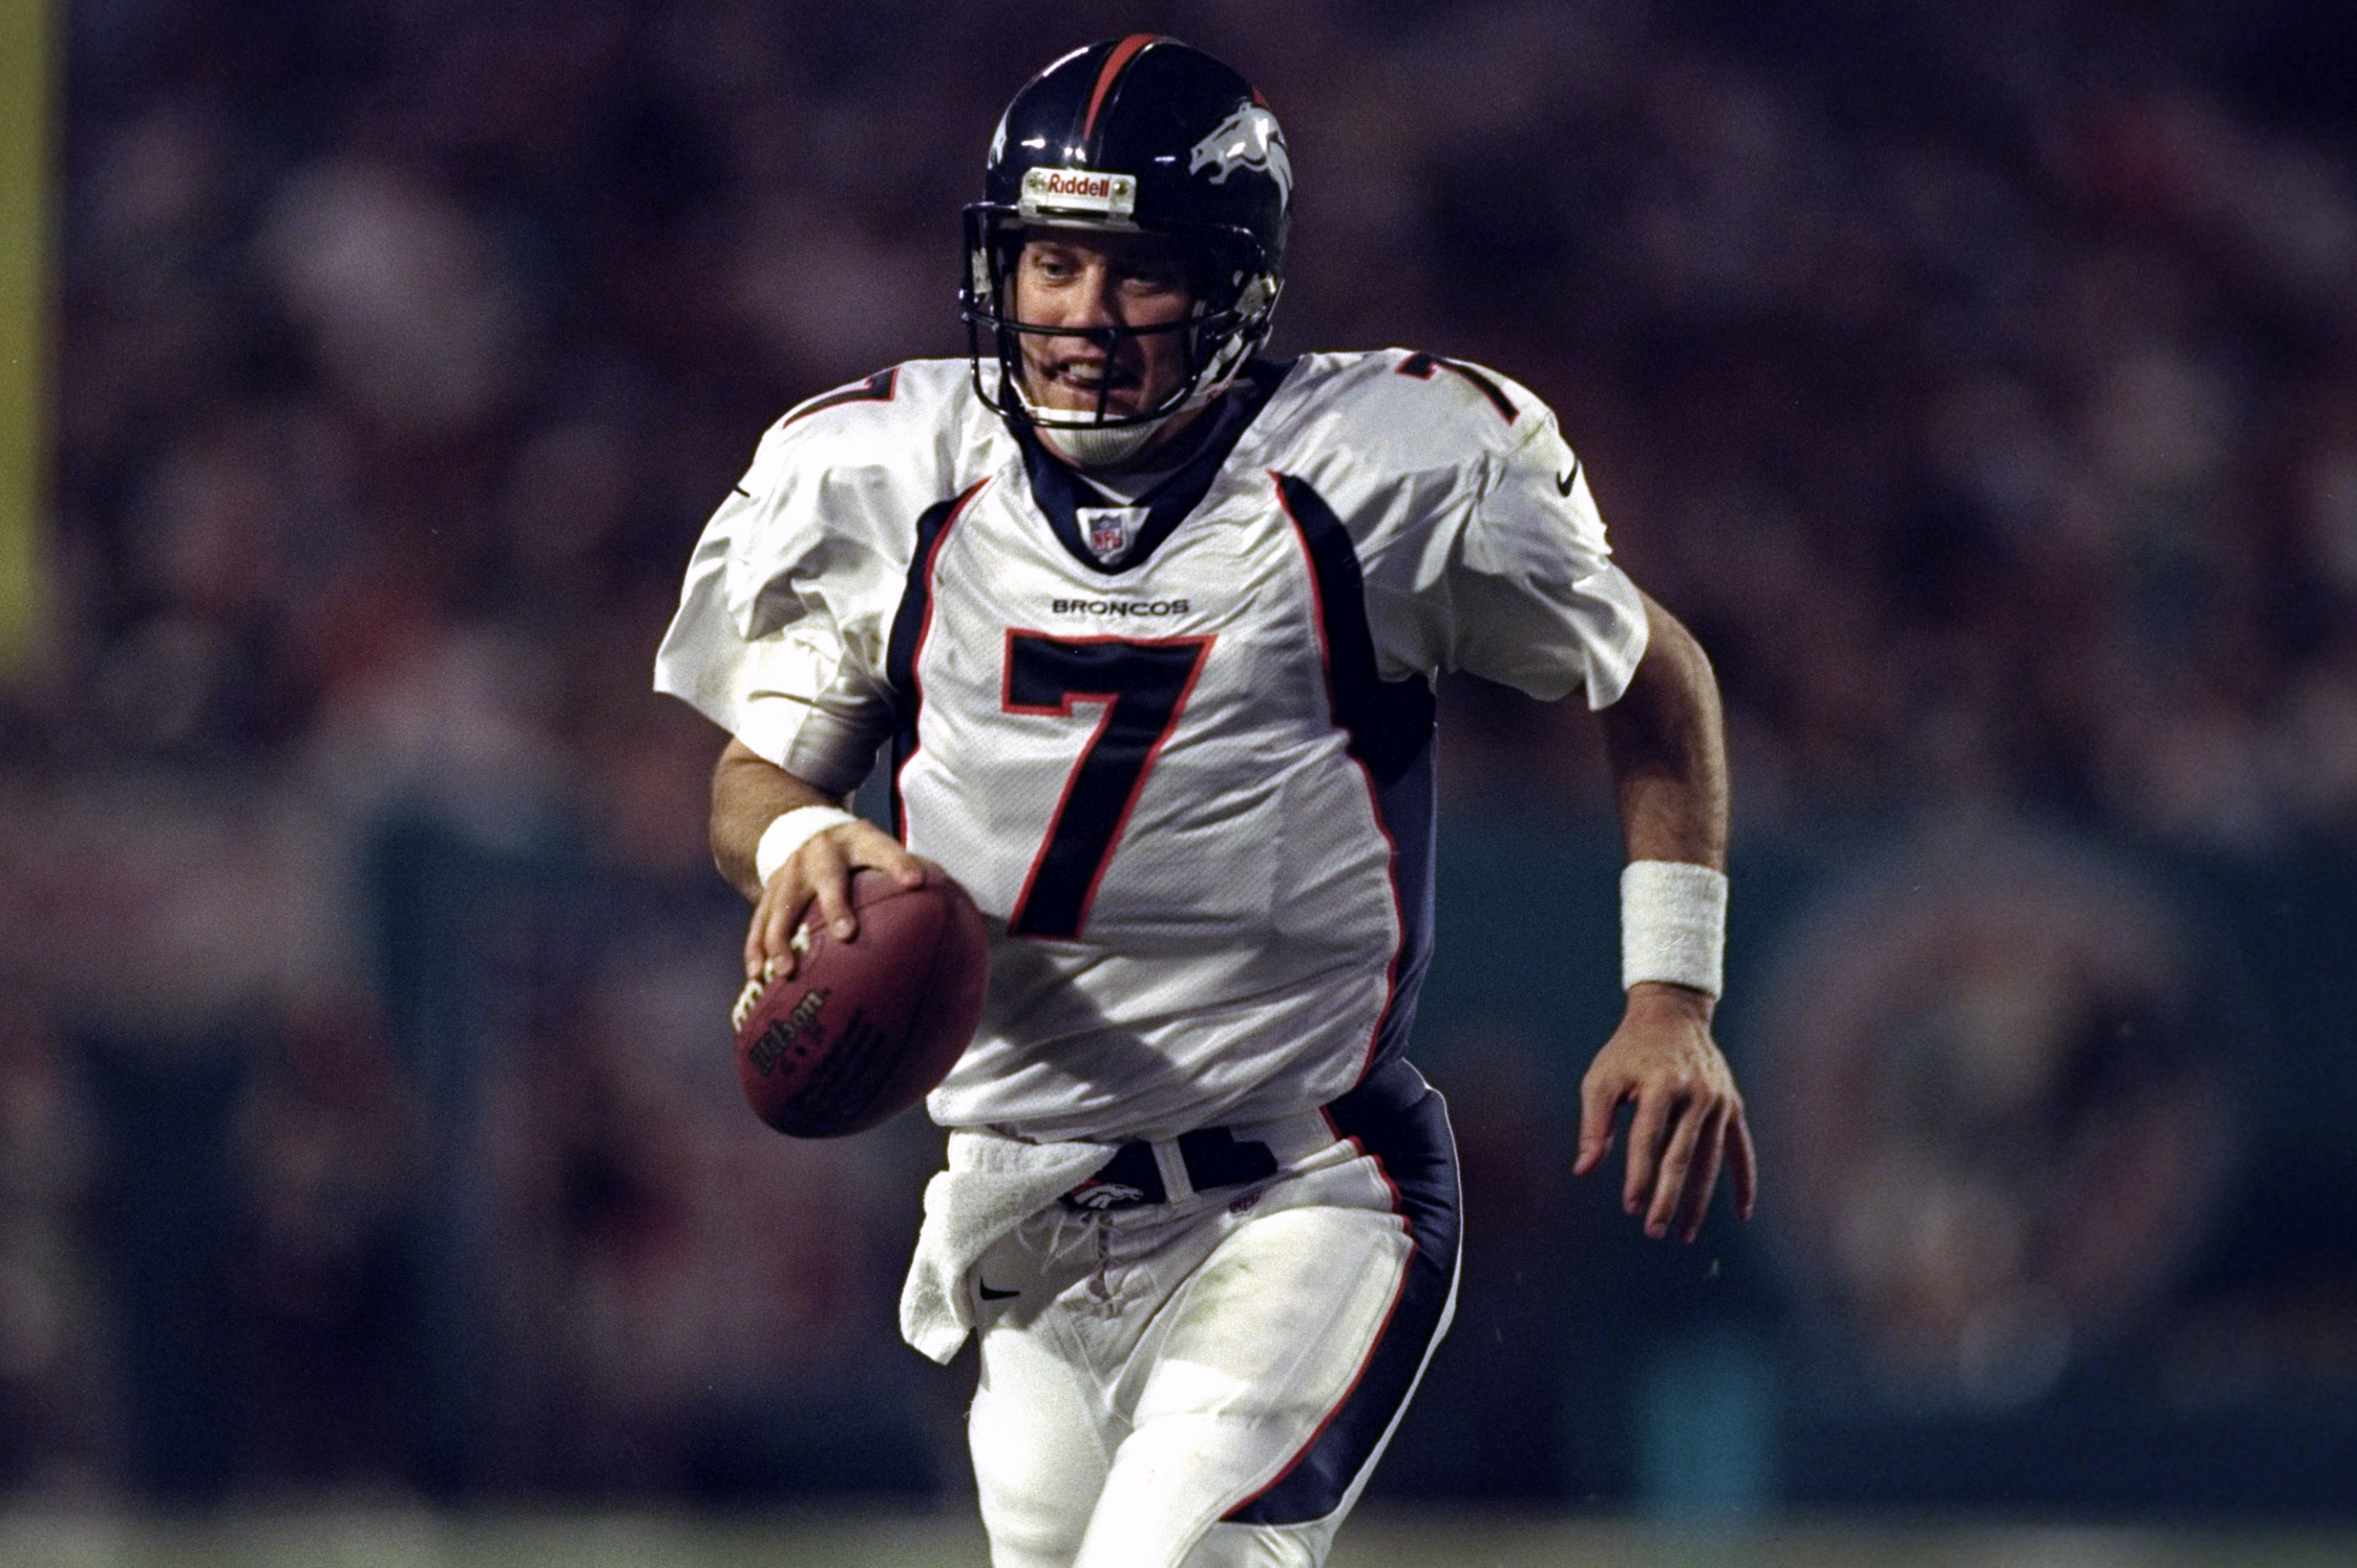 REPORT: John Elway Comes Out Of Retirement, Will Play QB For